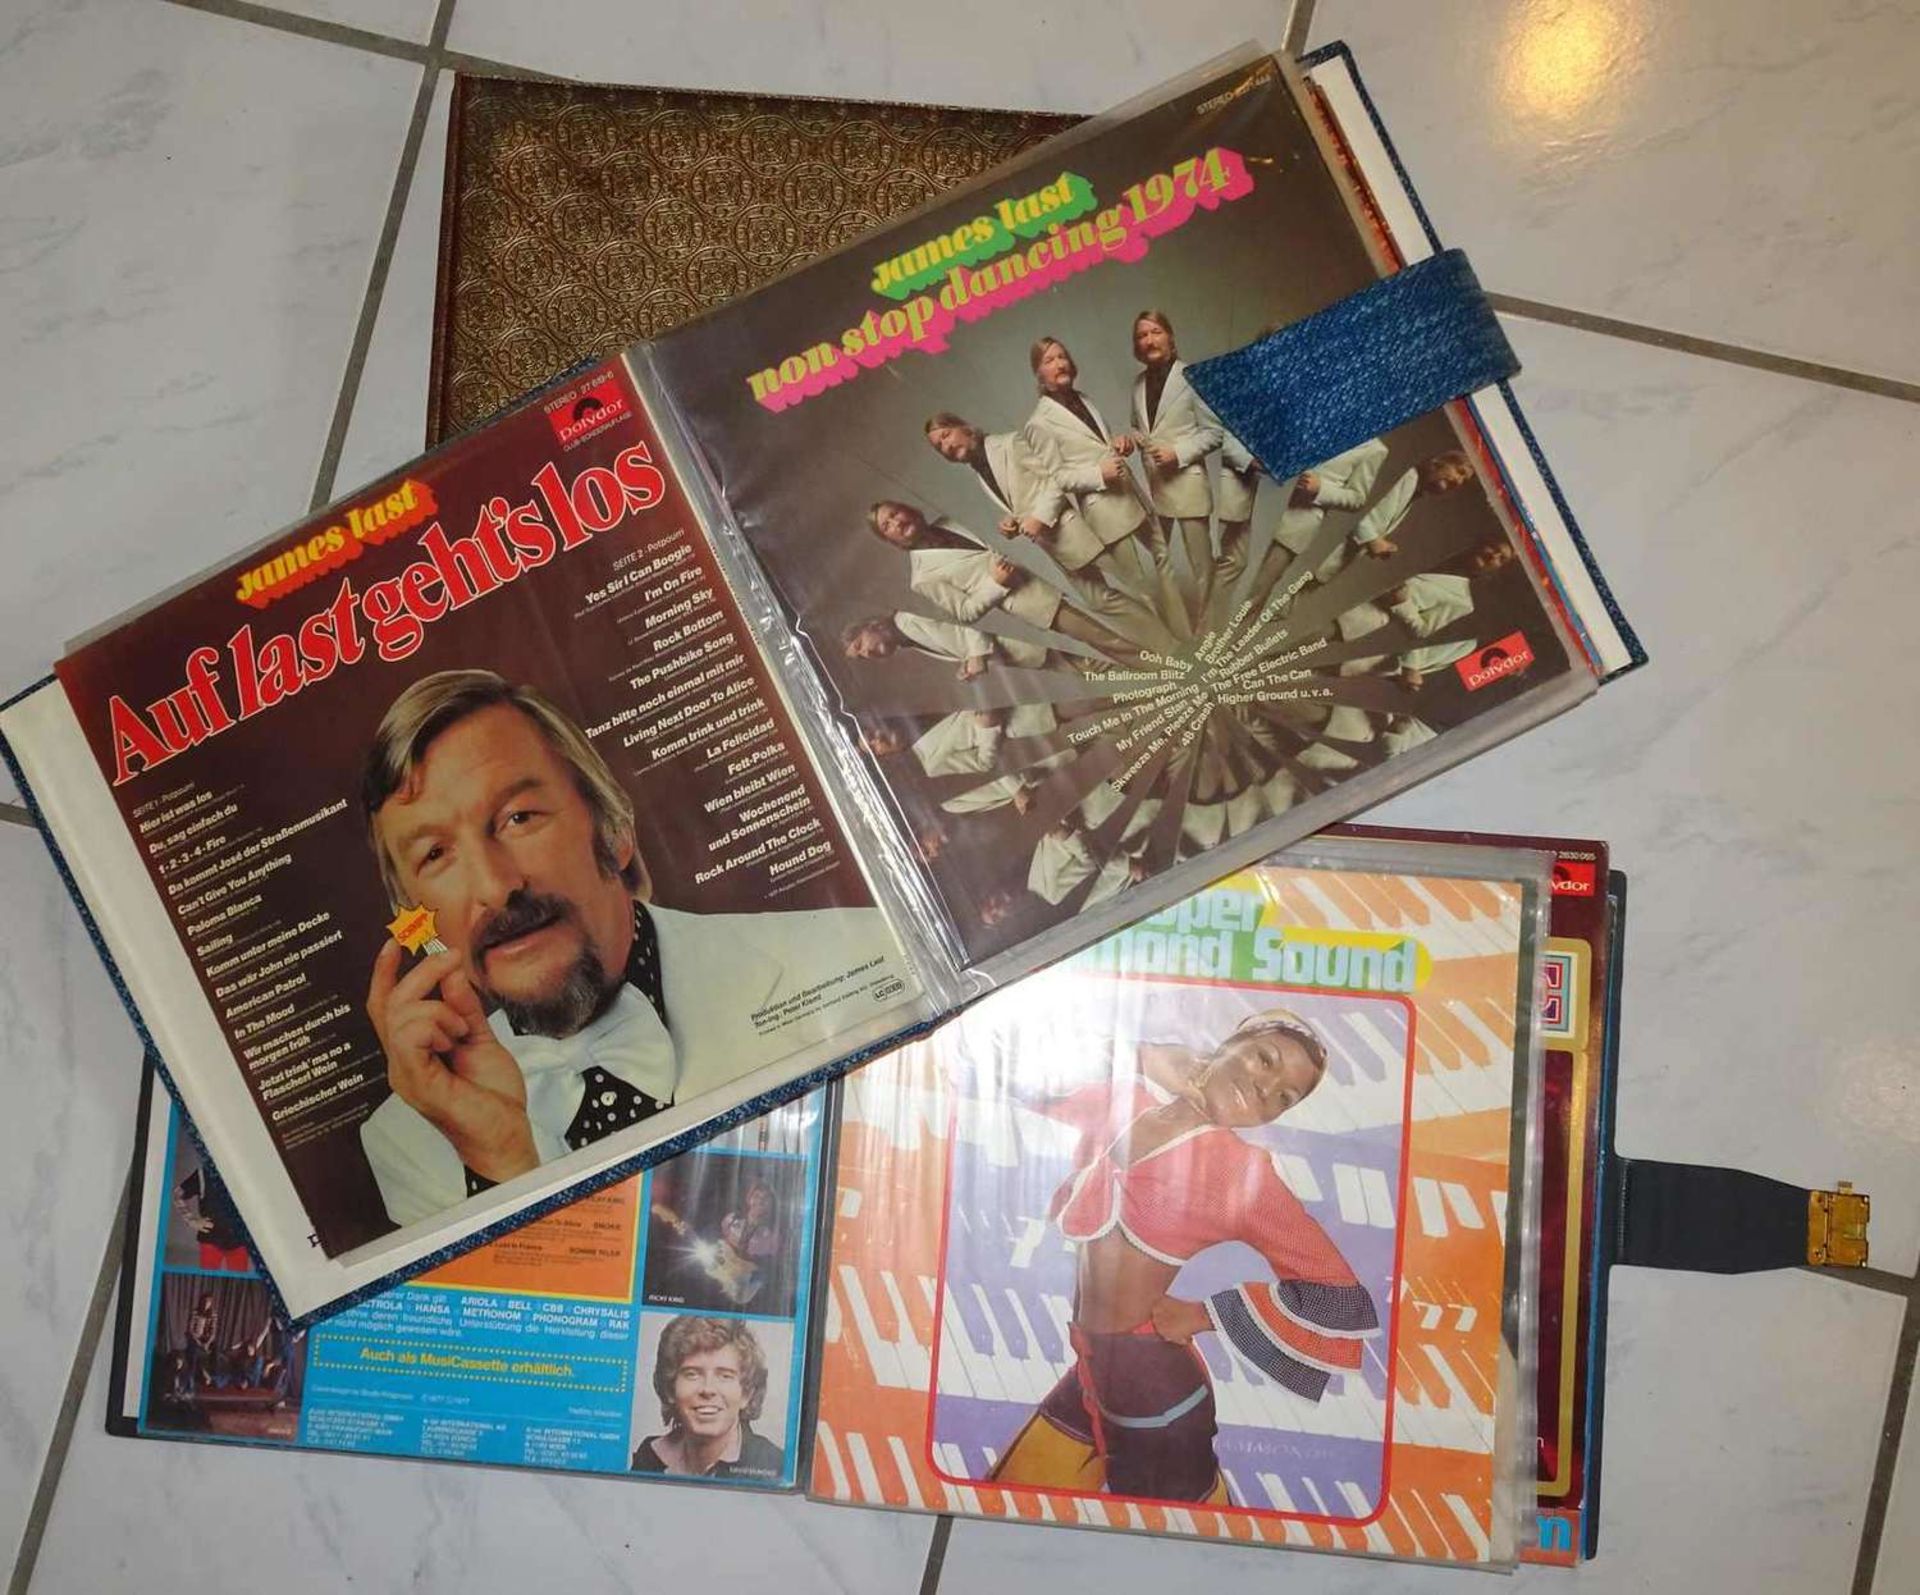 Lot of LPs in 3 thick folders, mostly hits from the 70s and operettas.Lot LP´s in 3 dicken Mappen,